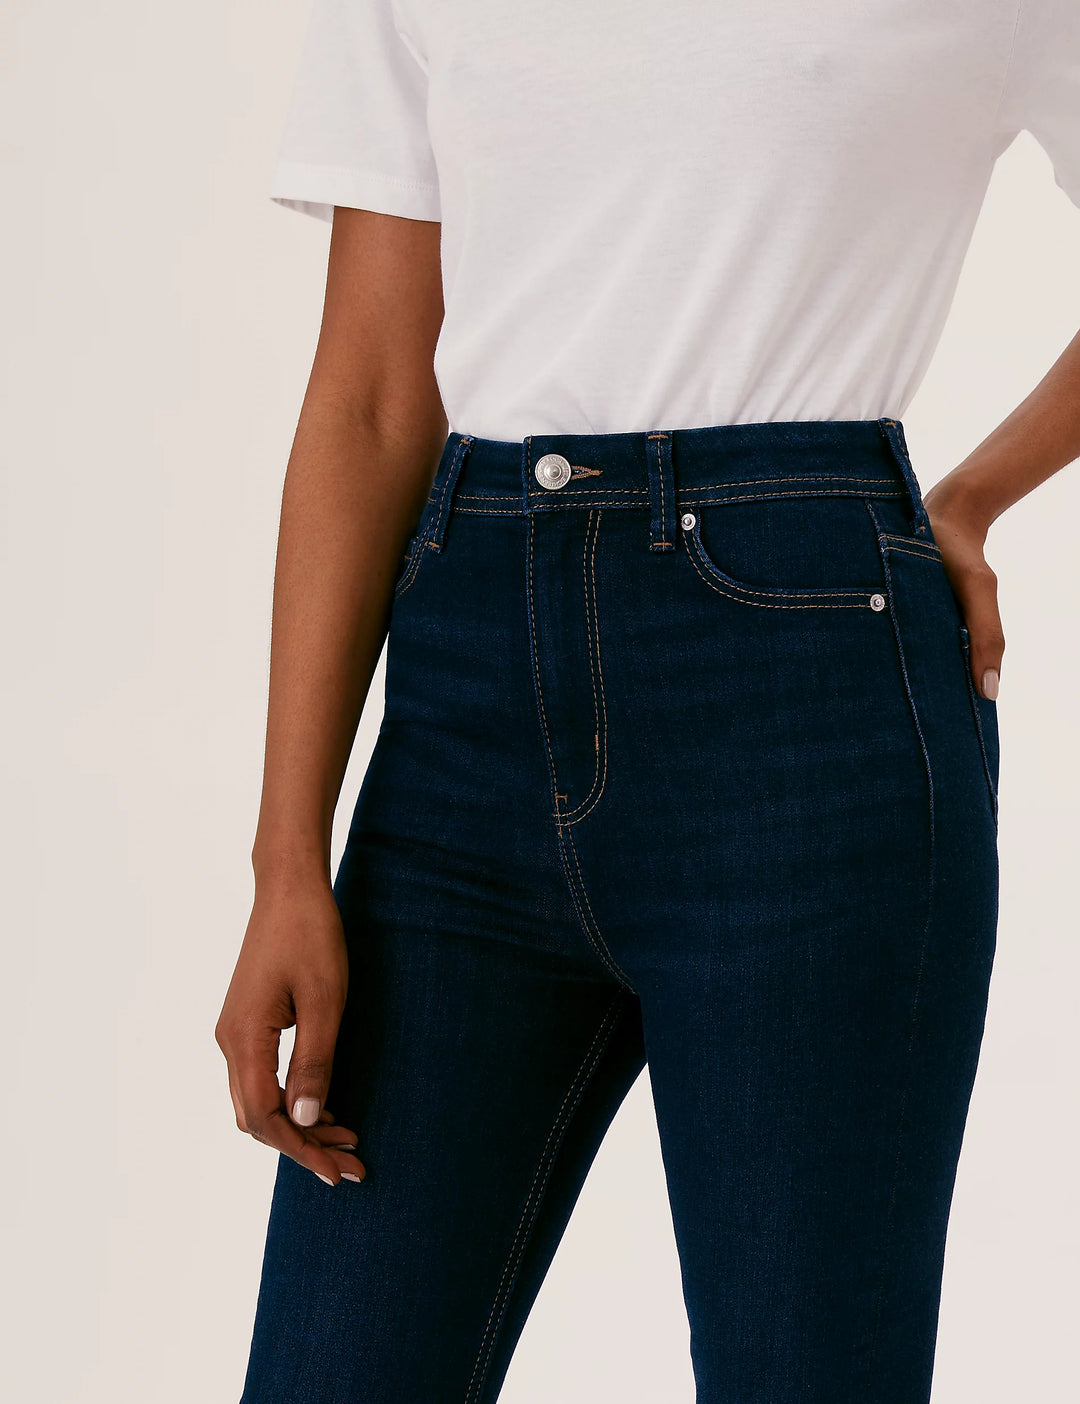 Patch Pocket Flare High Waisted Jeans, M&S Collection